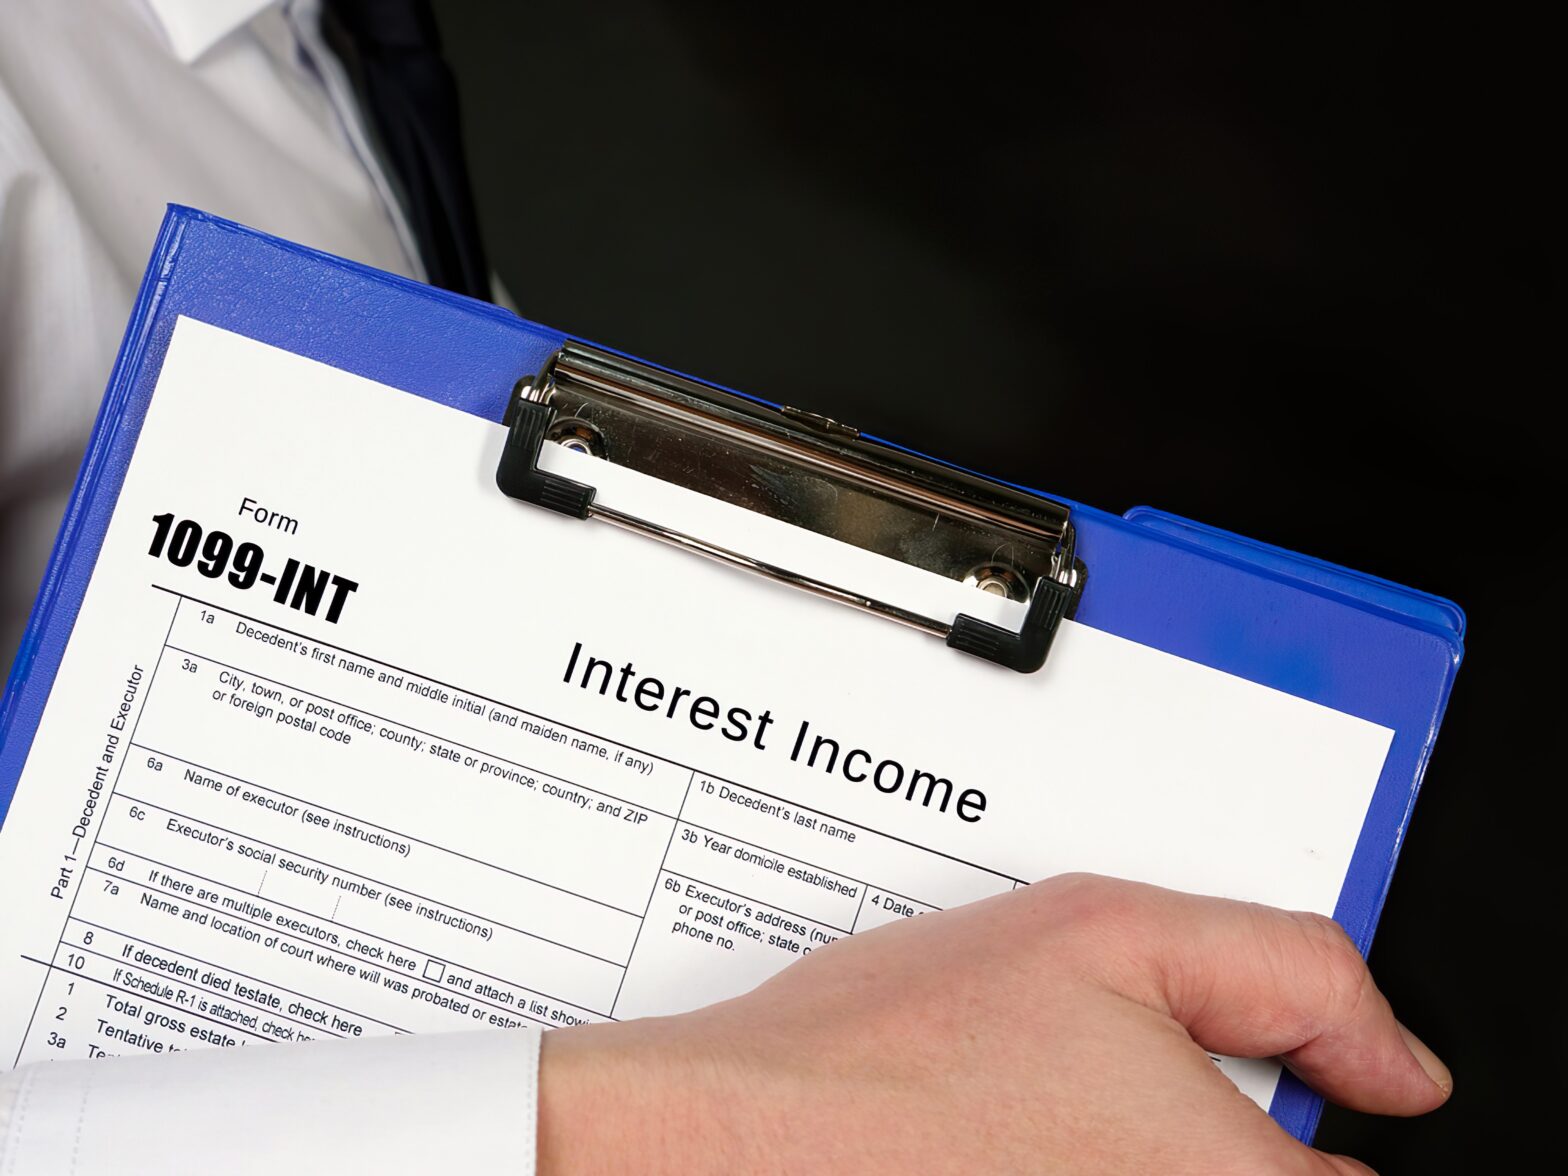 Everything to Know About Interest Income-1099-INT